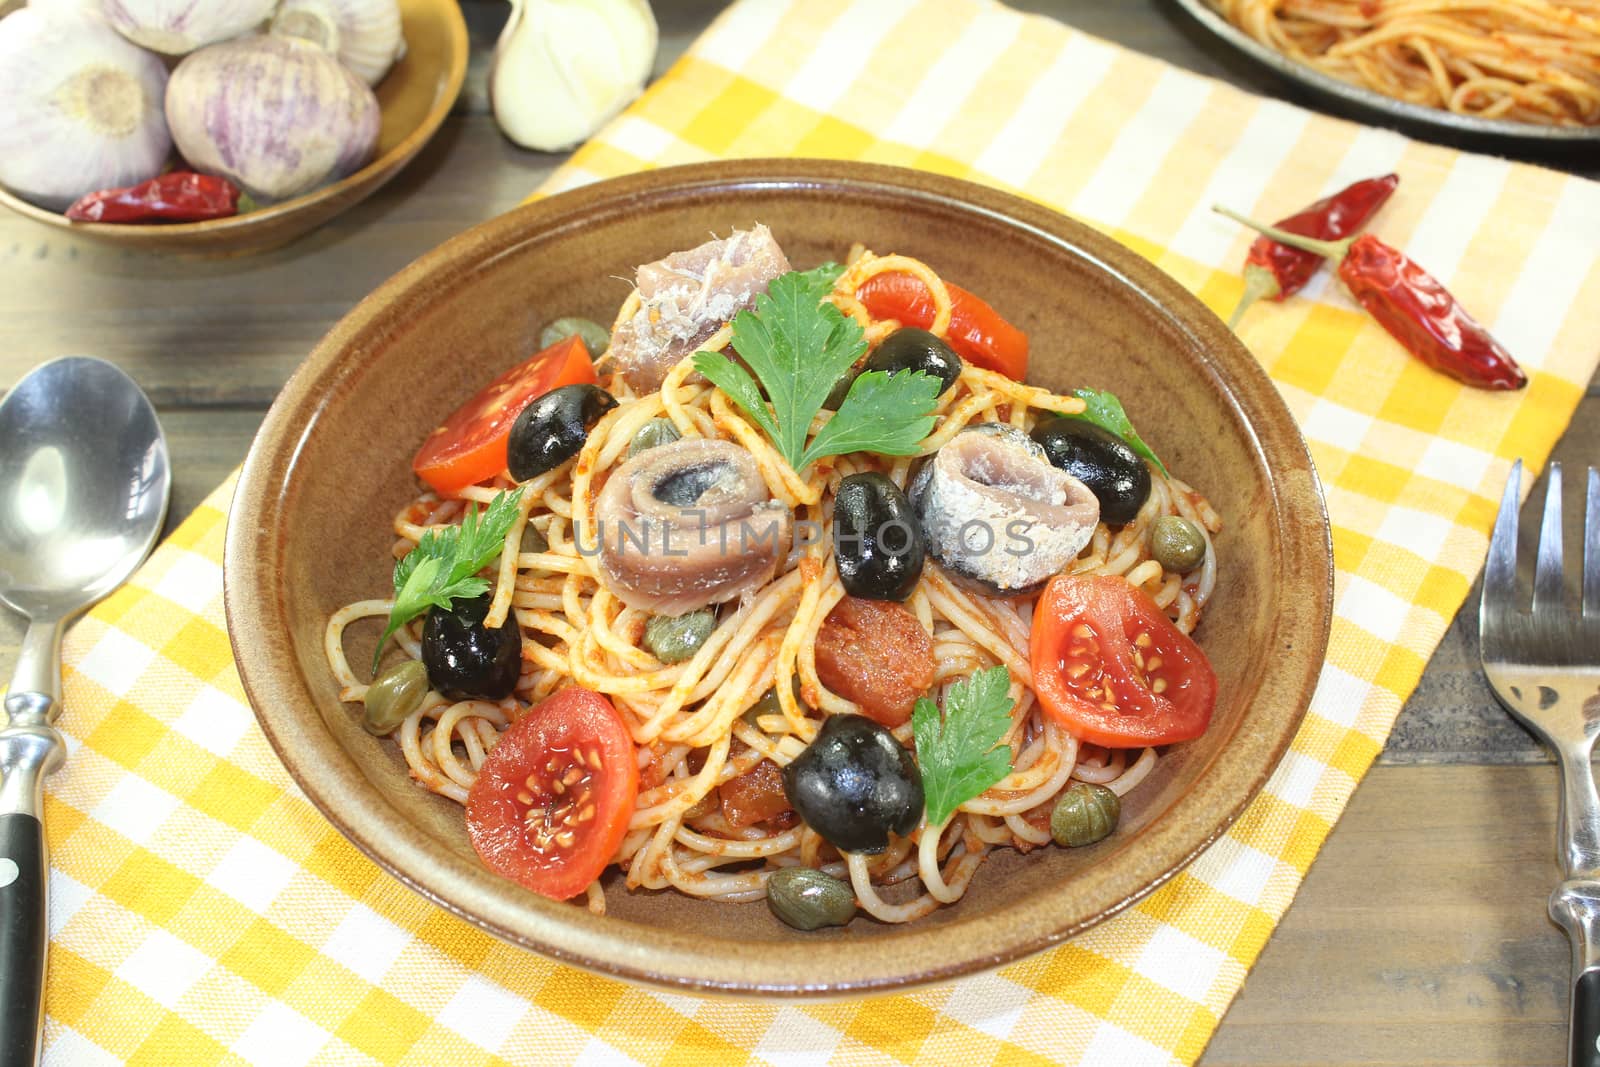 Spaghetti alla puttanesca with olives, capers and anchovies on a napkin